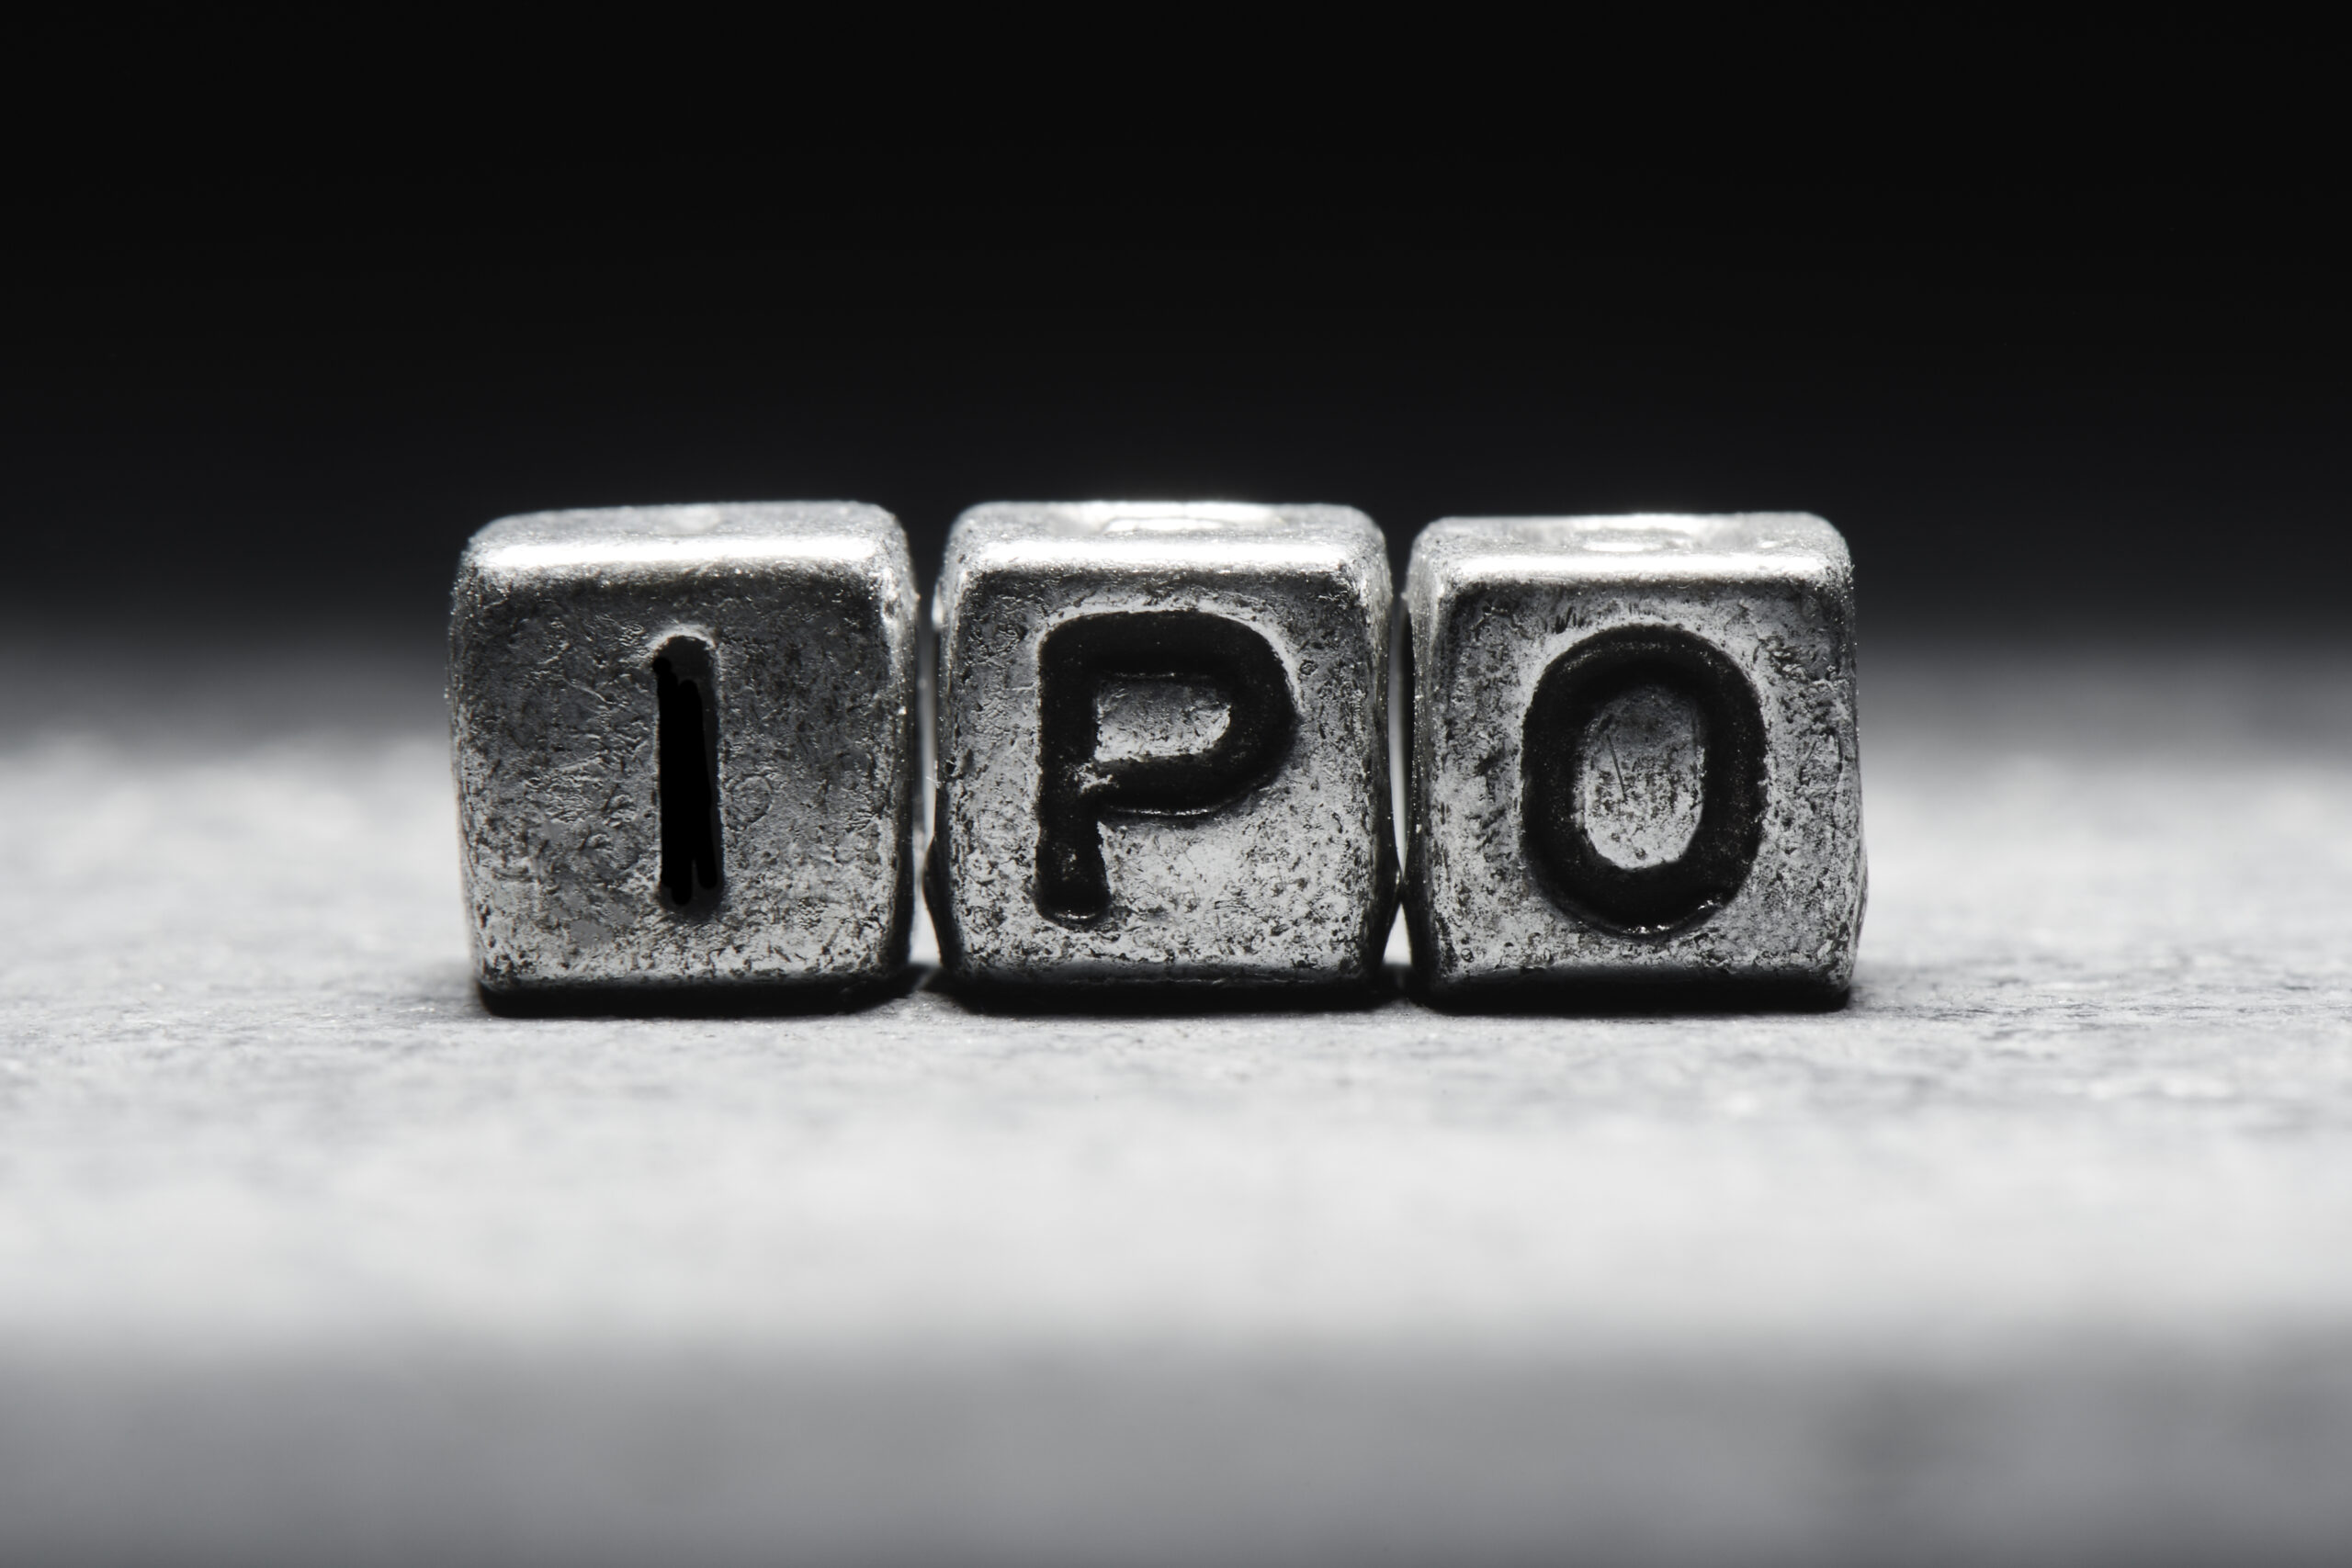 Learnings-from-IPO-Marksmen-Daily